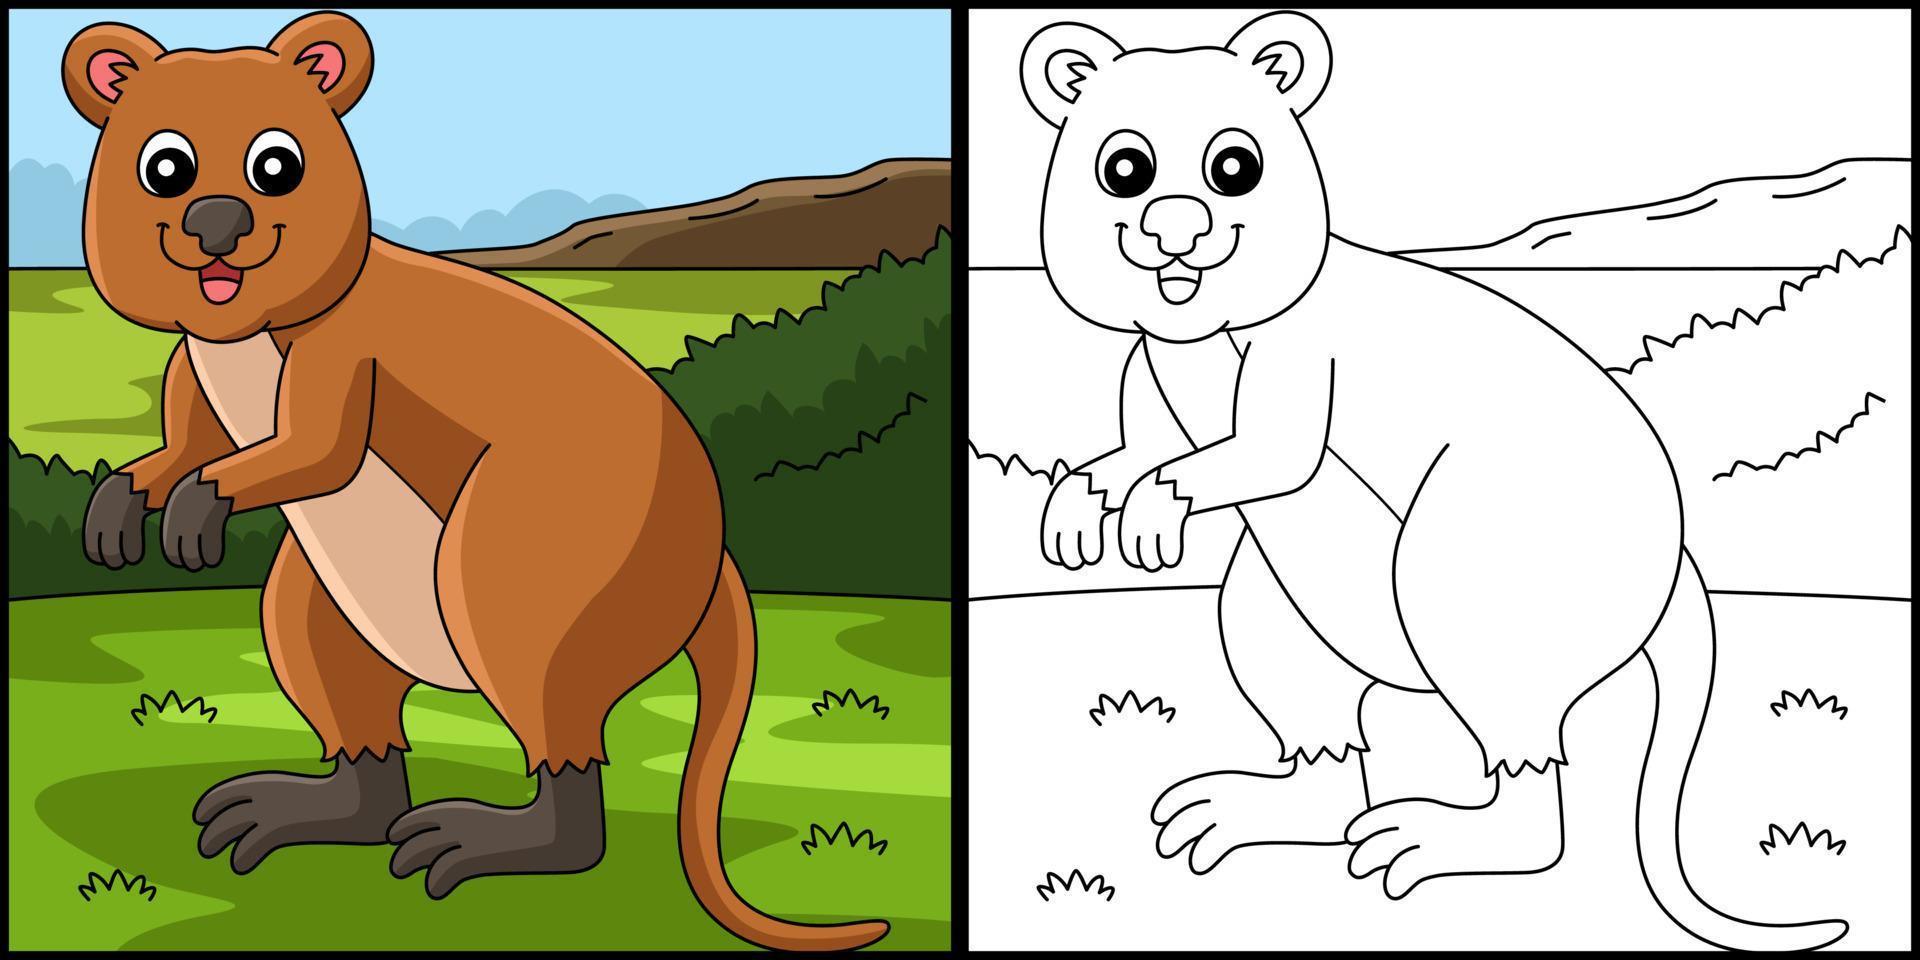 Quokka Animal Coloring Page Colored Illustration vector